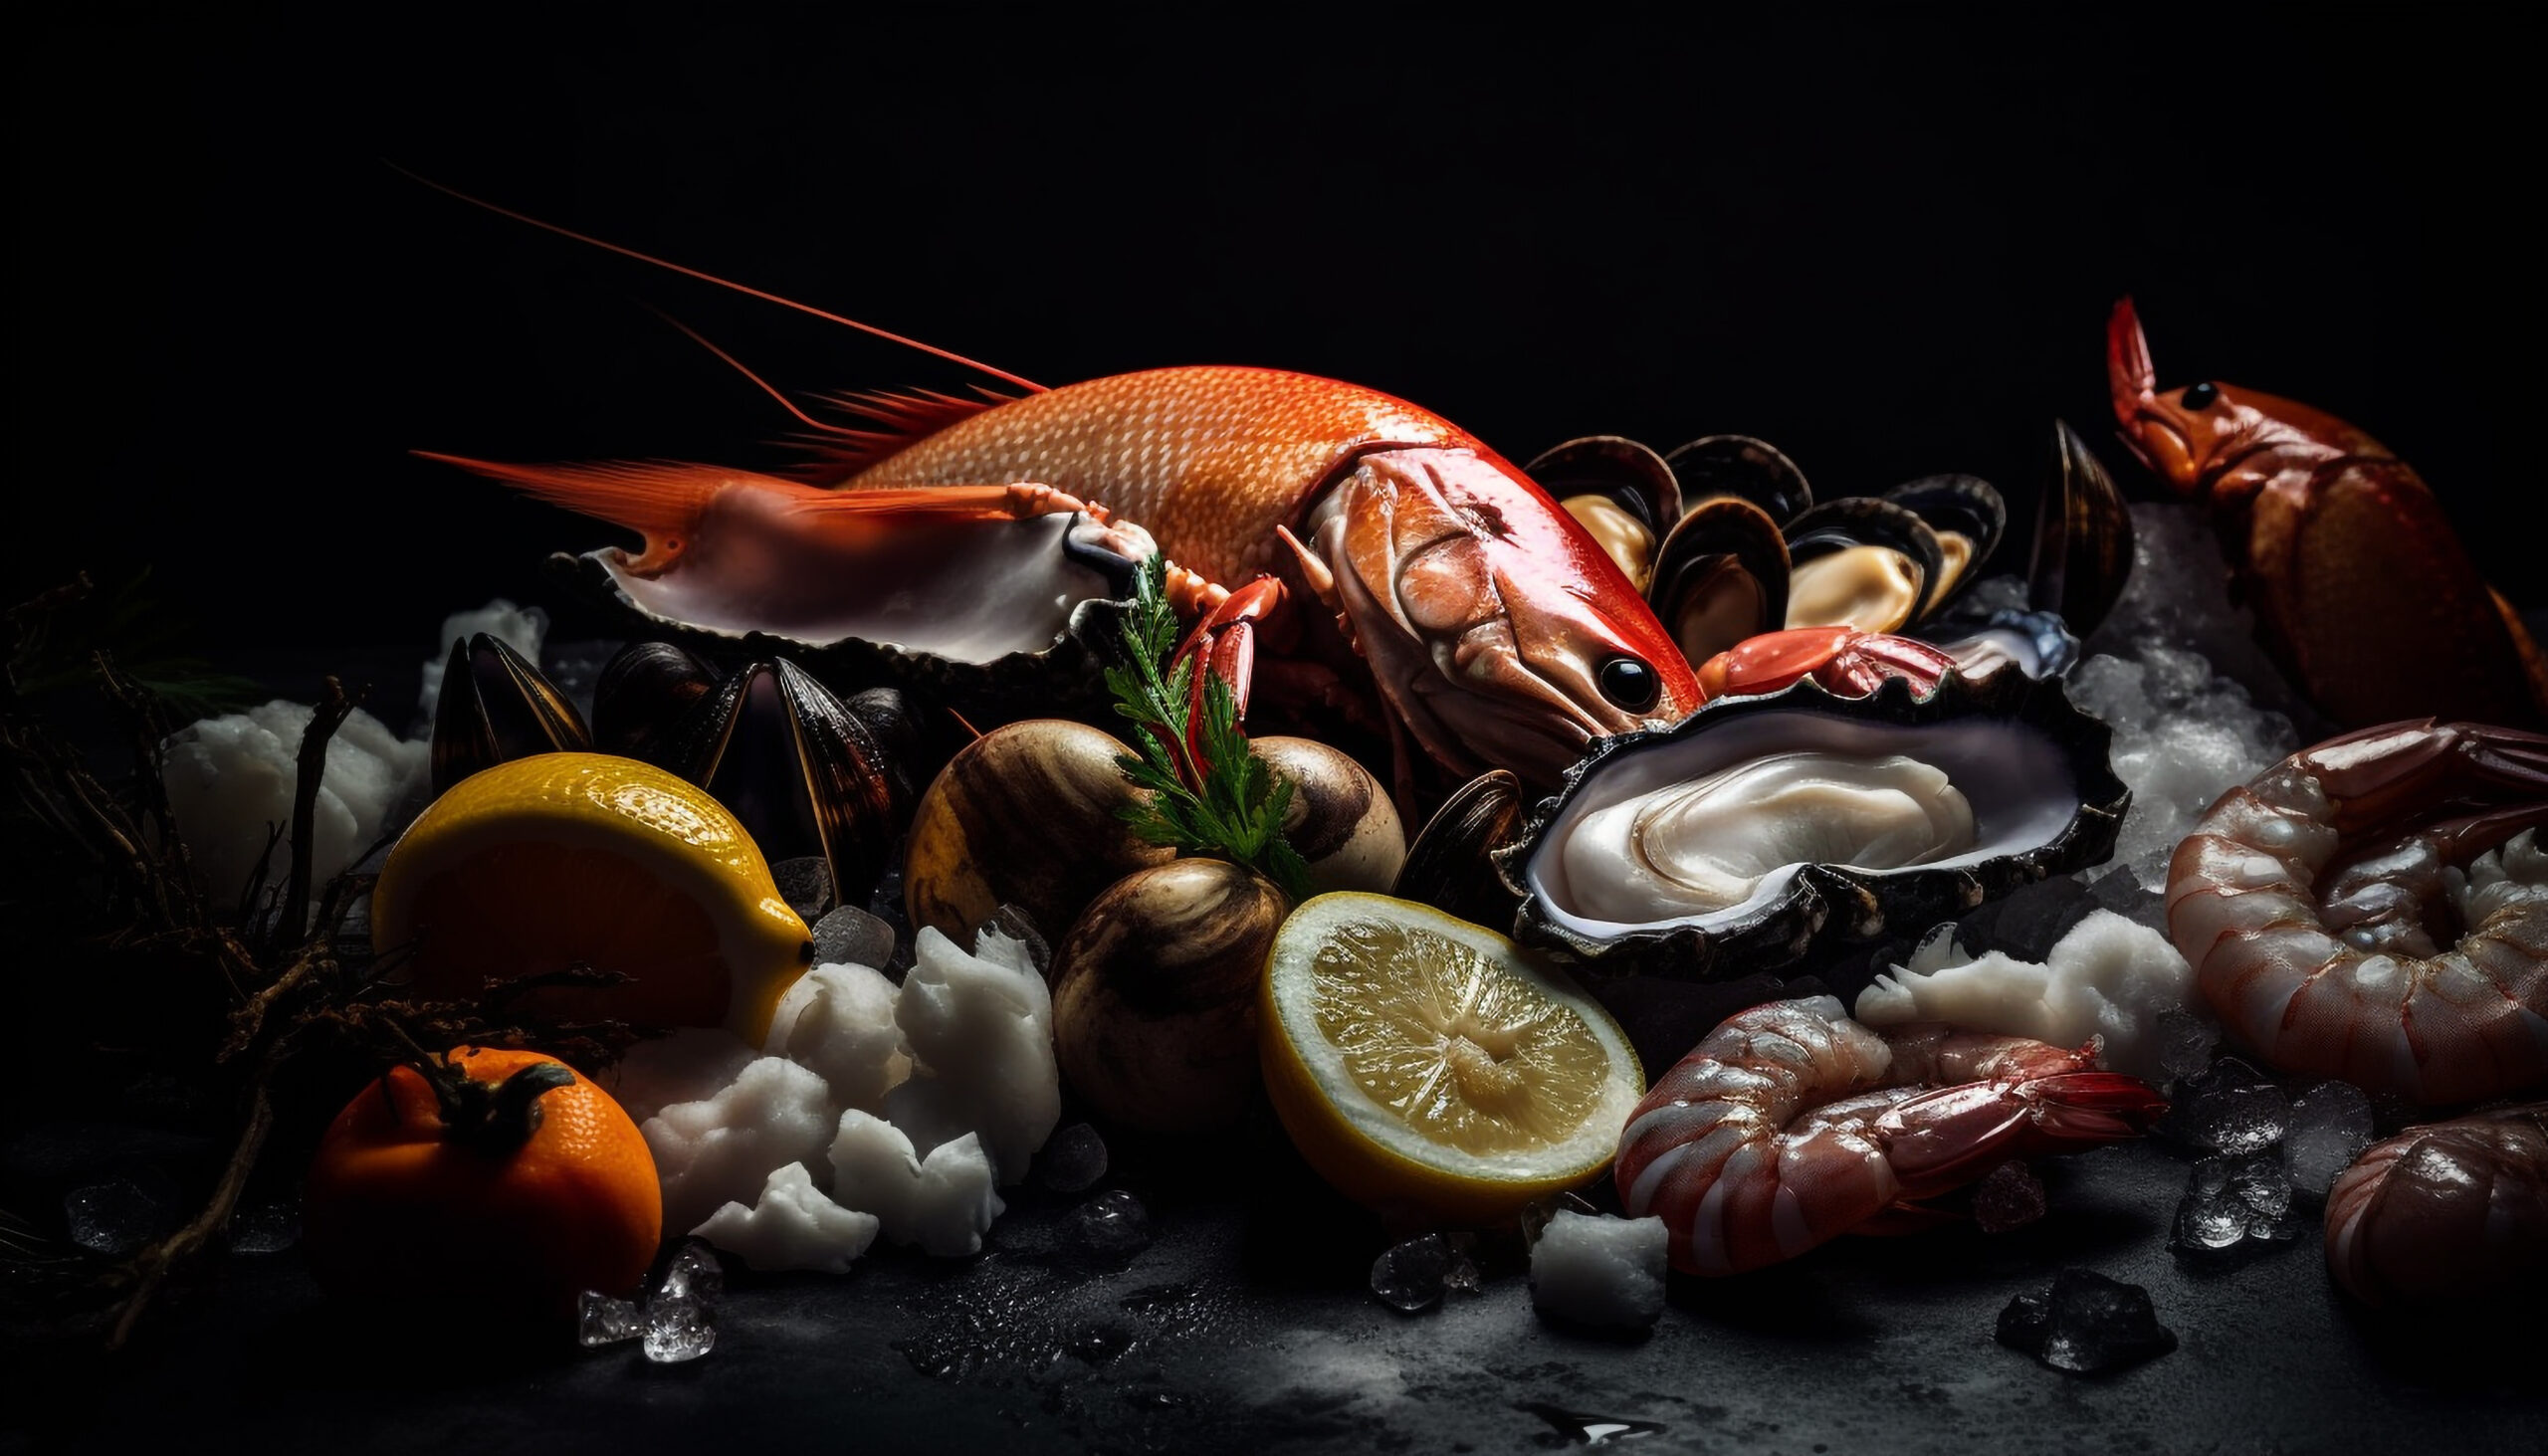 Fresh seafood meal grilled prawn, scampi, and octopus generated by artificial intelligence, Image courtesy of Vecteezy